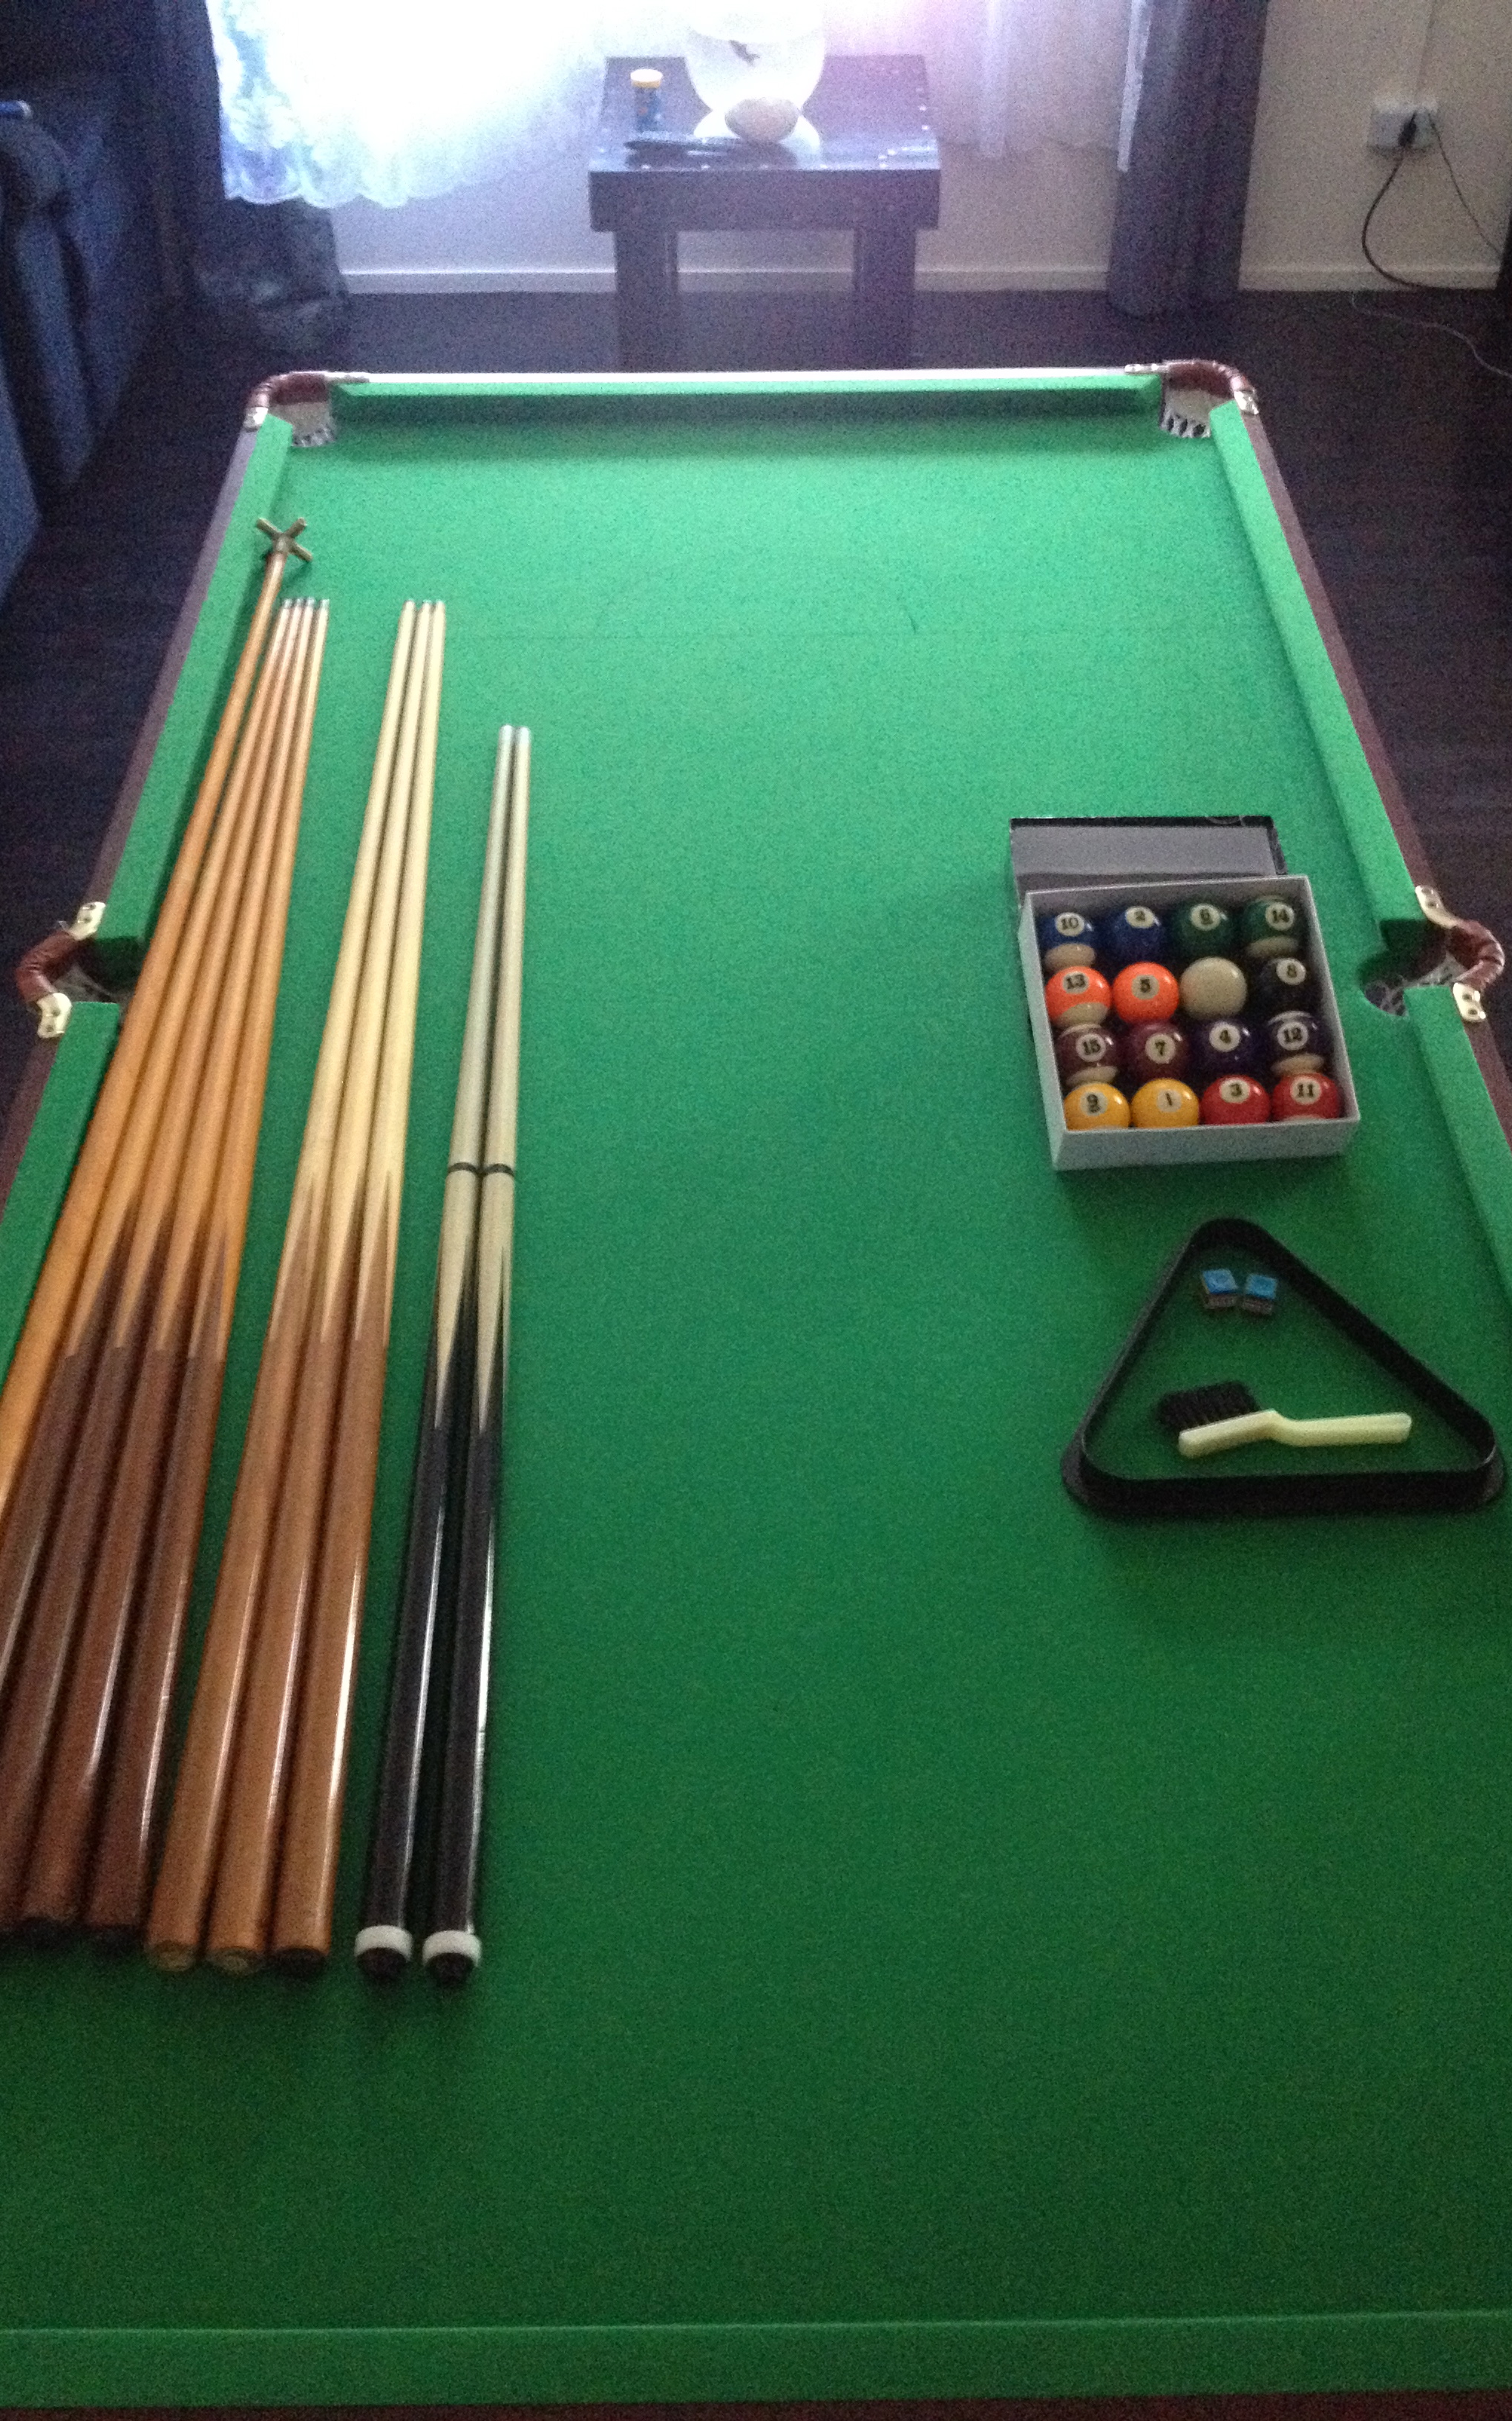 POOL Table With Foldable LEGS For Easy Storage. Comes With Accessories